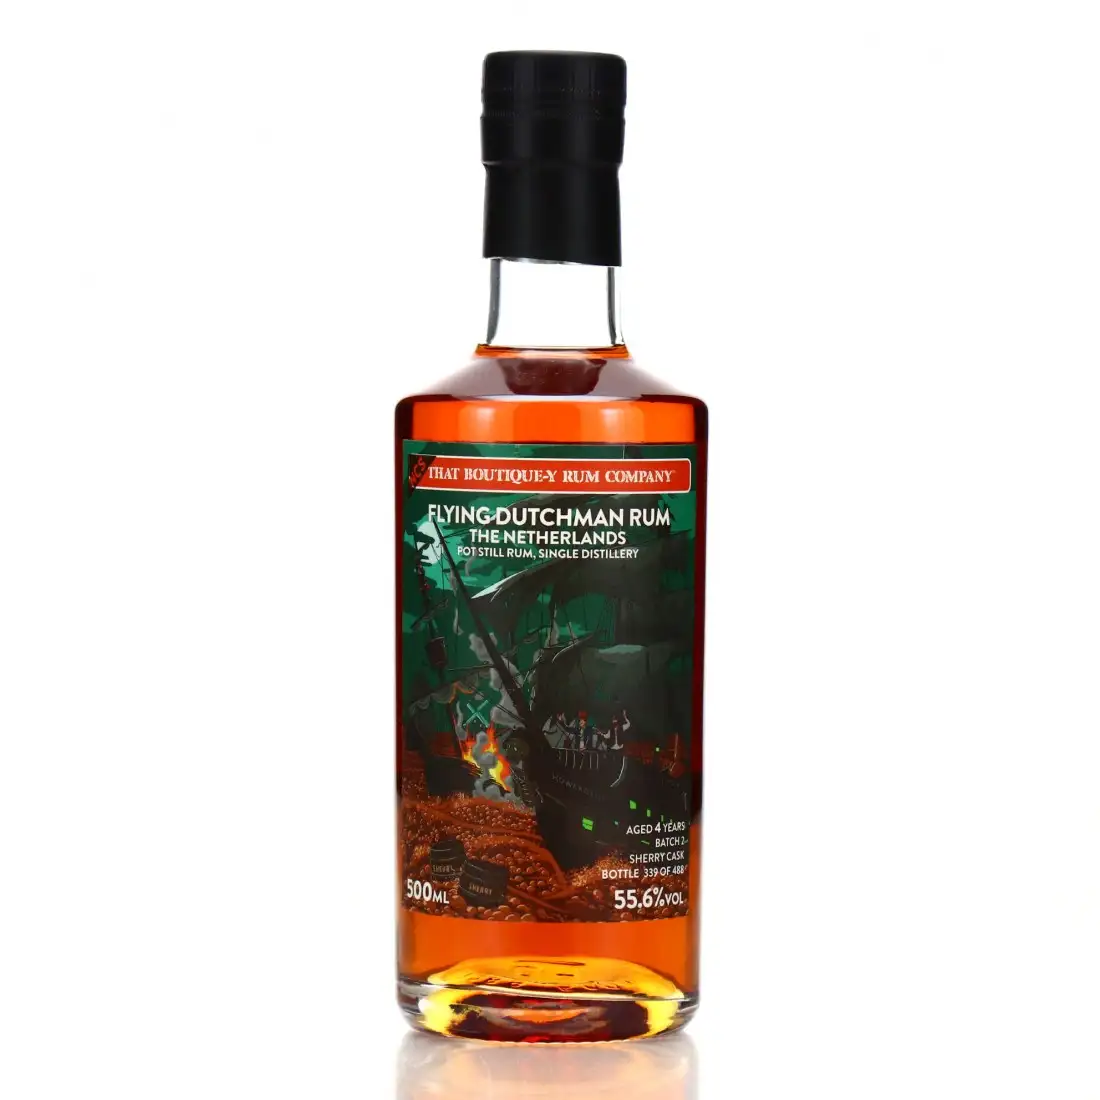 Image of the front of the bottle of the rum Flying Dutchman The Netherlands